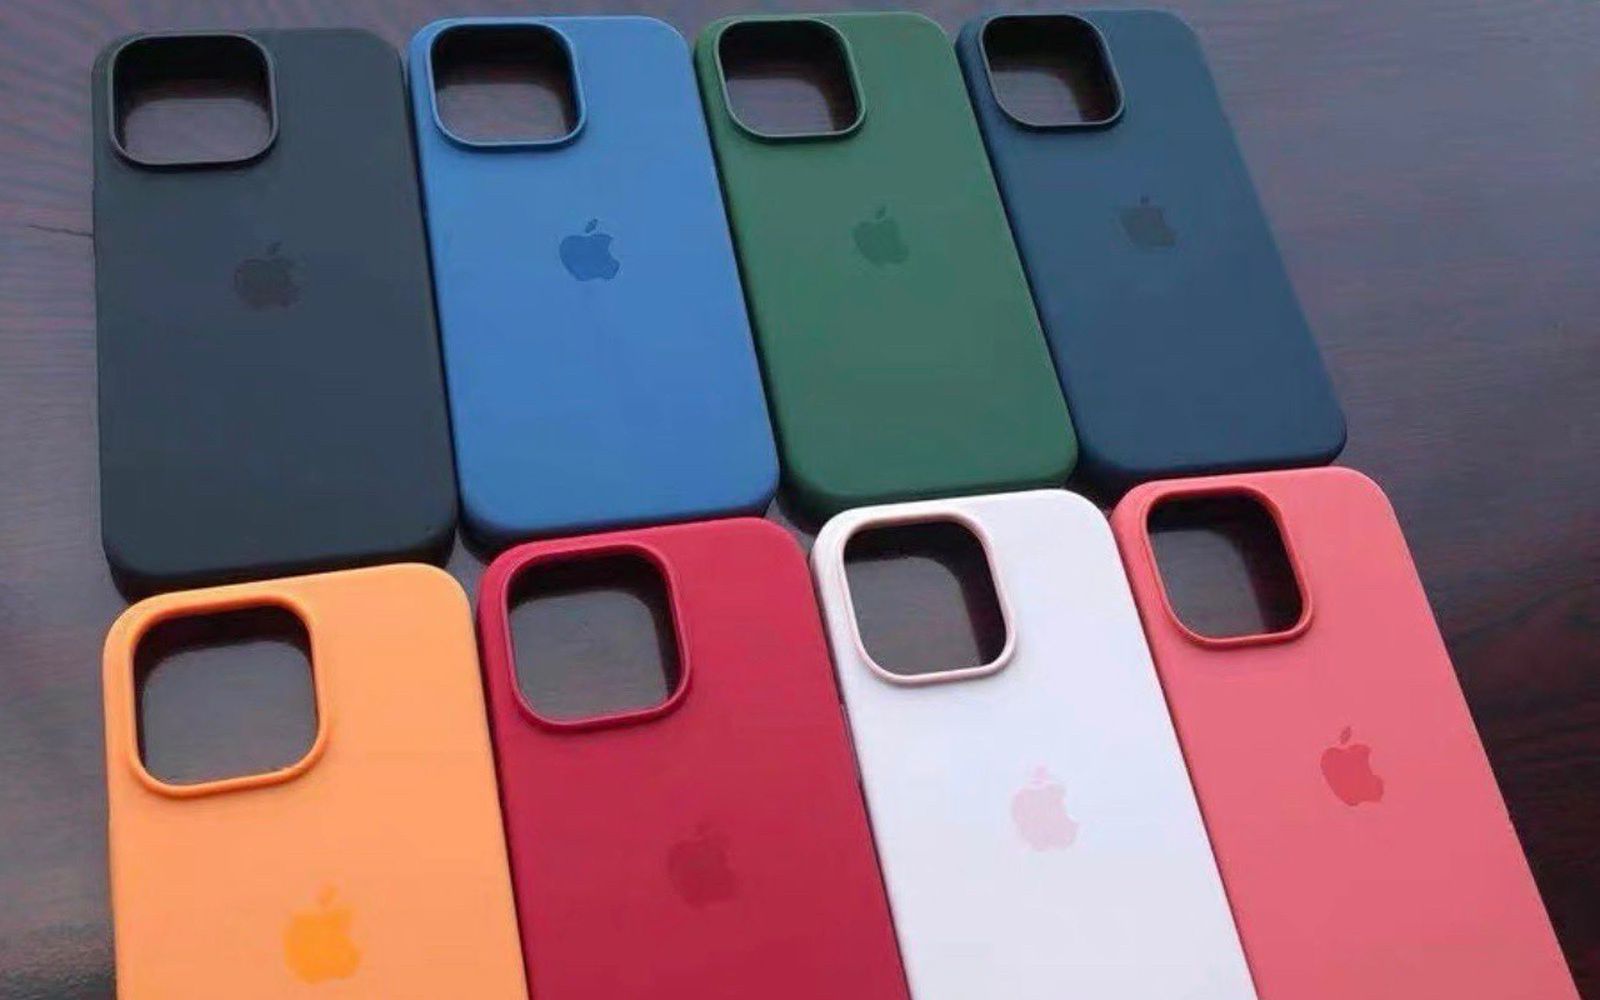 Images Allegedly Show New iPhone 13 Case Colors Ahead of Apple Event -  MacRumors